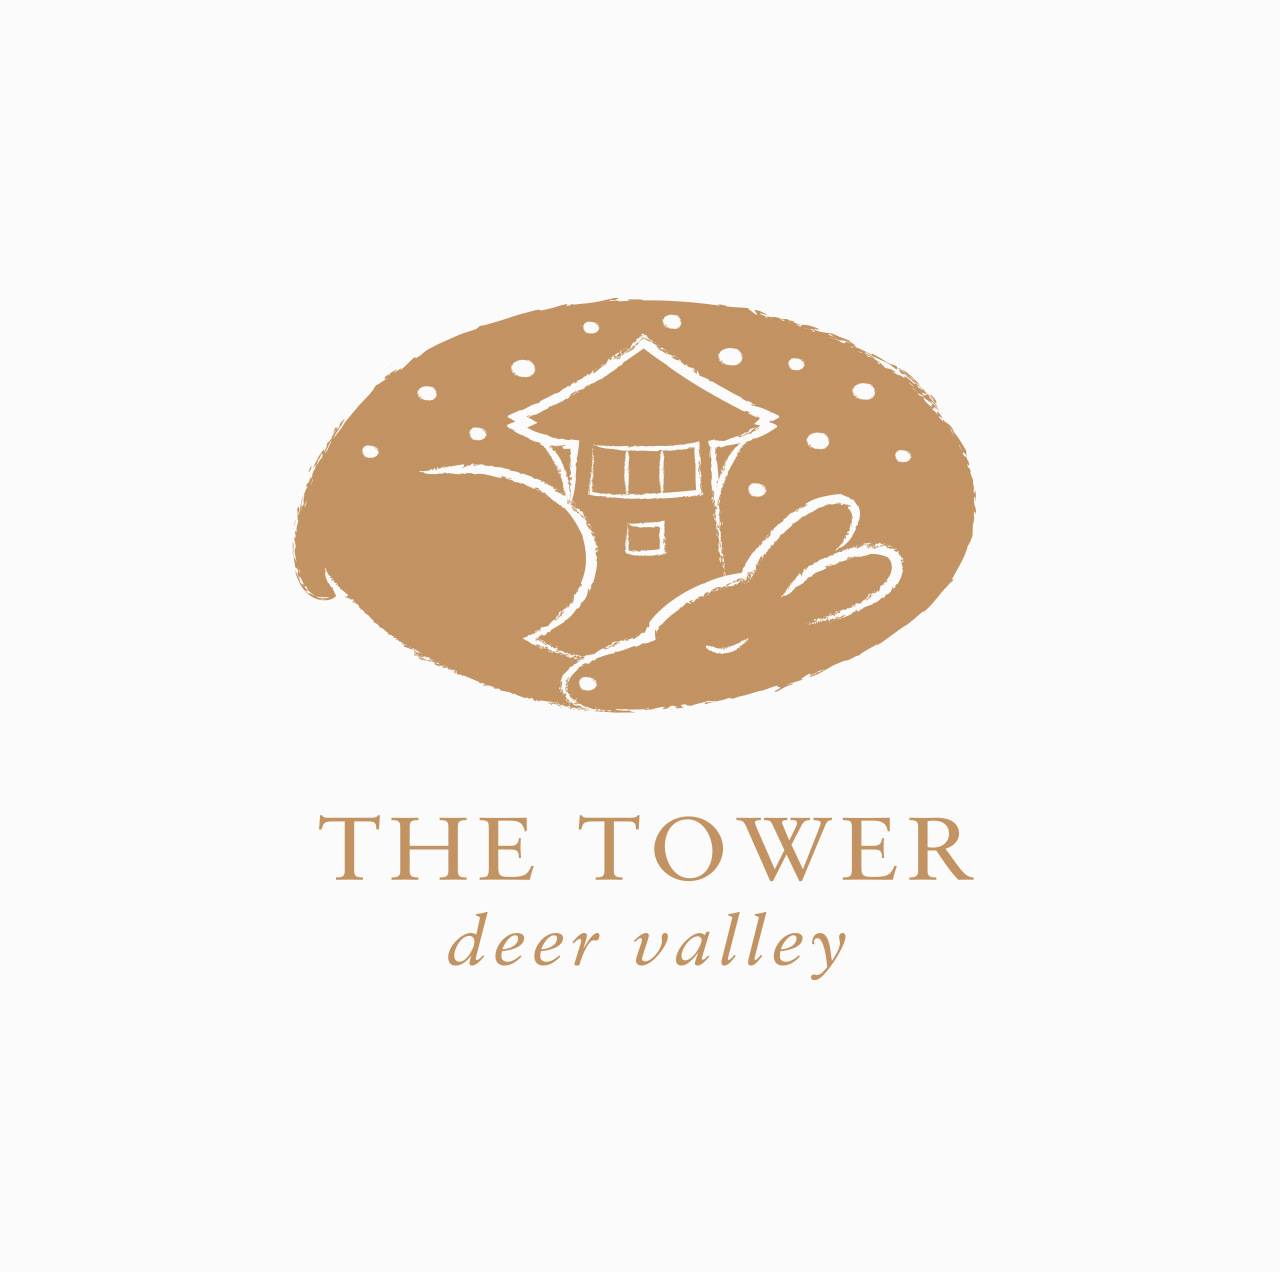 Logo design and type treatment for The Tower at Deer Valley